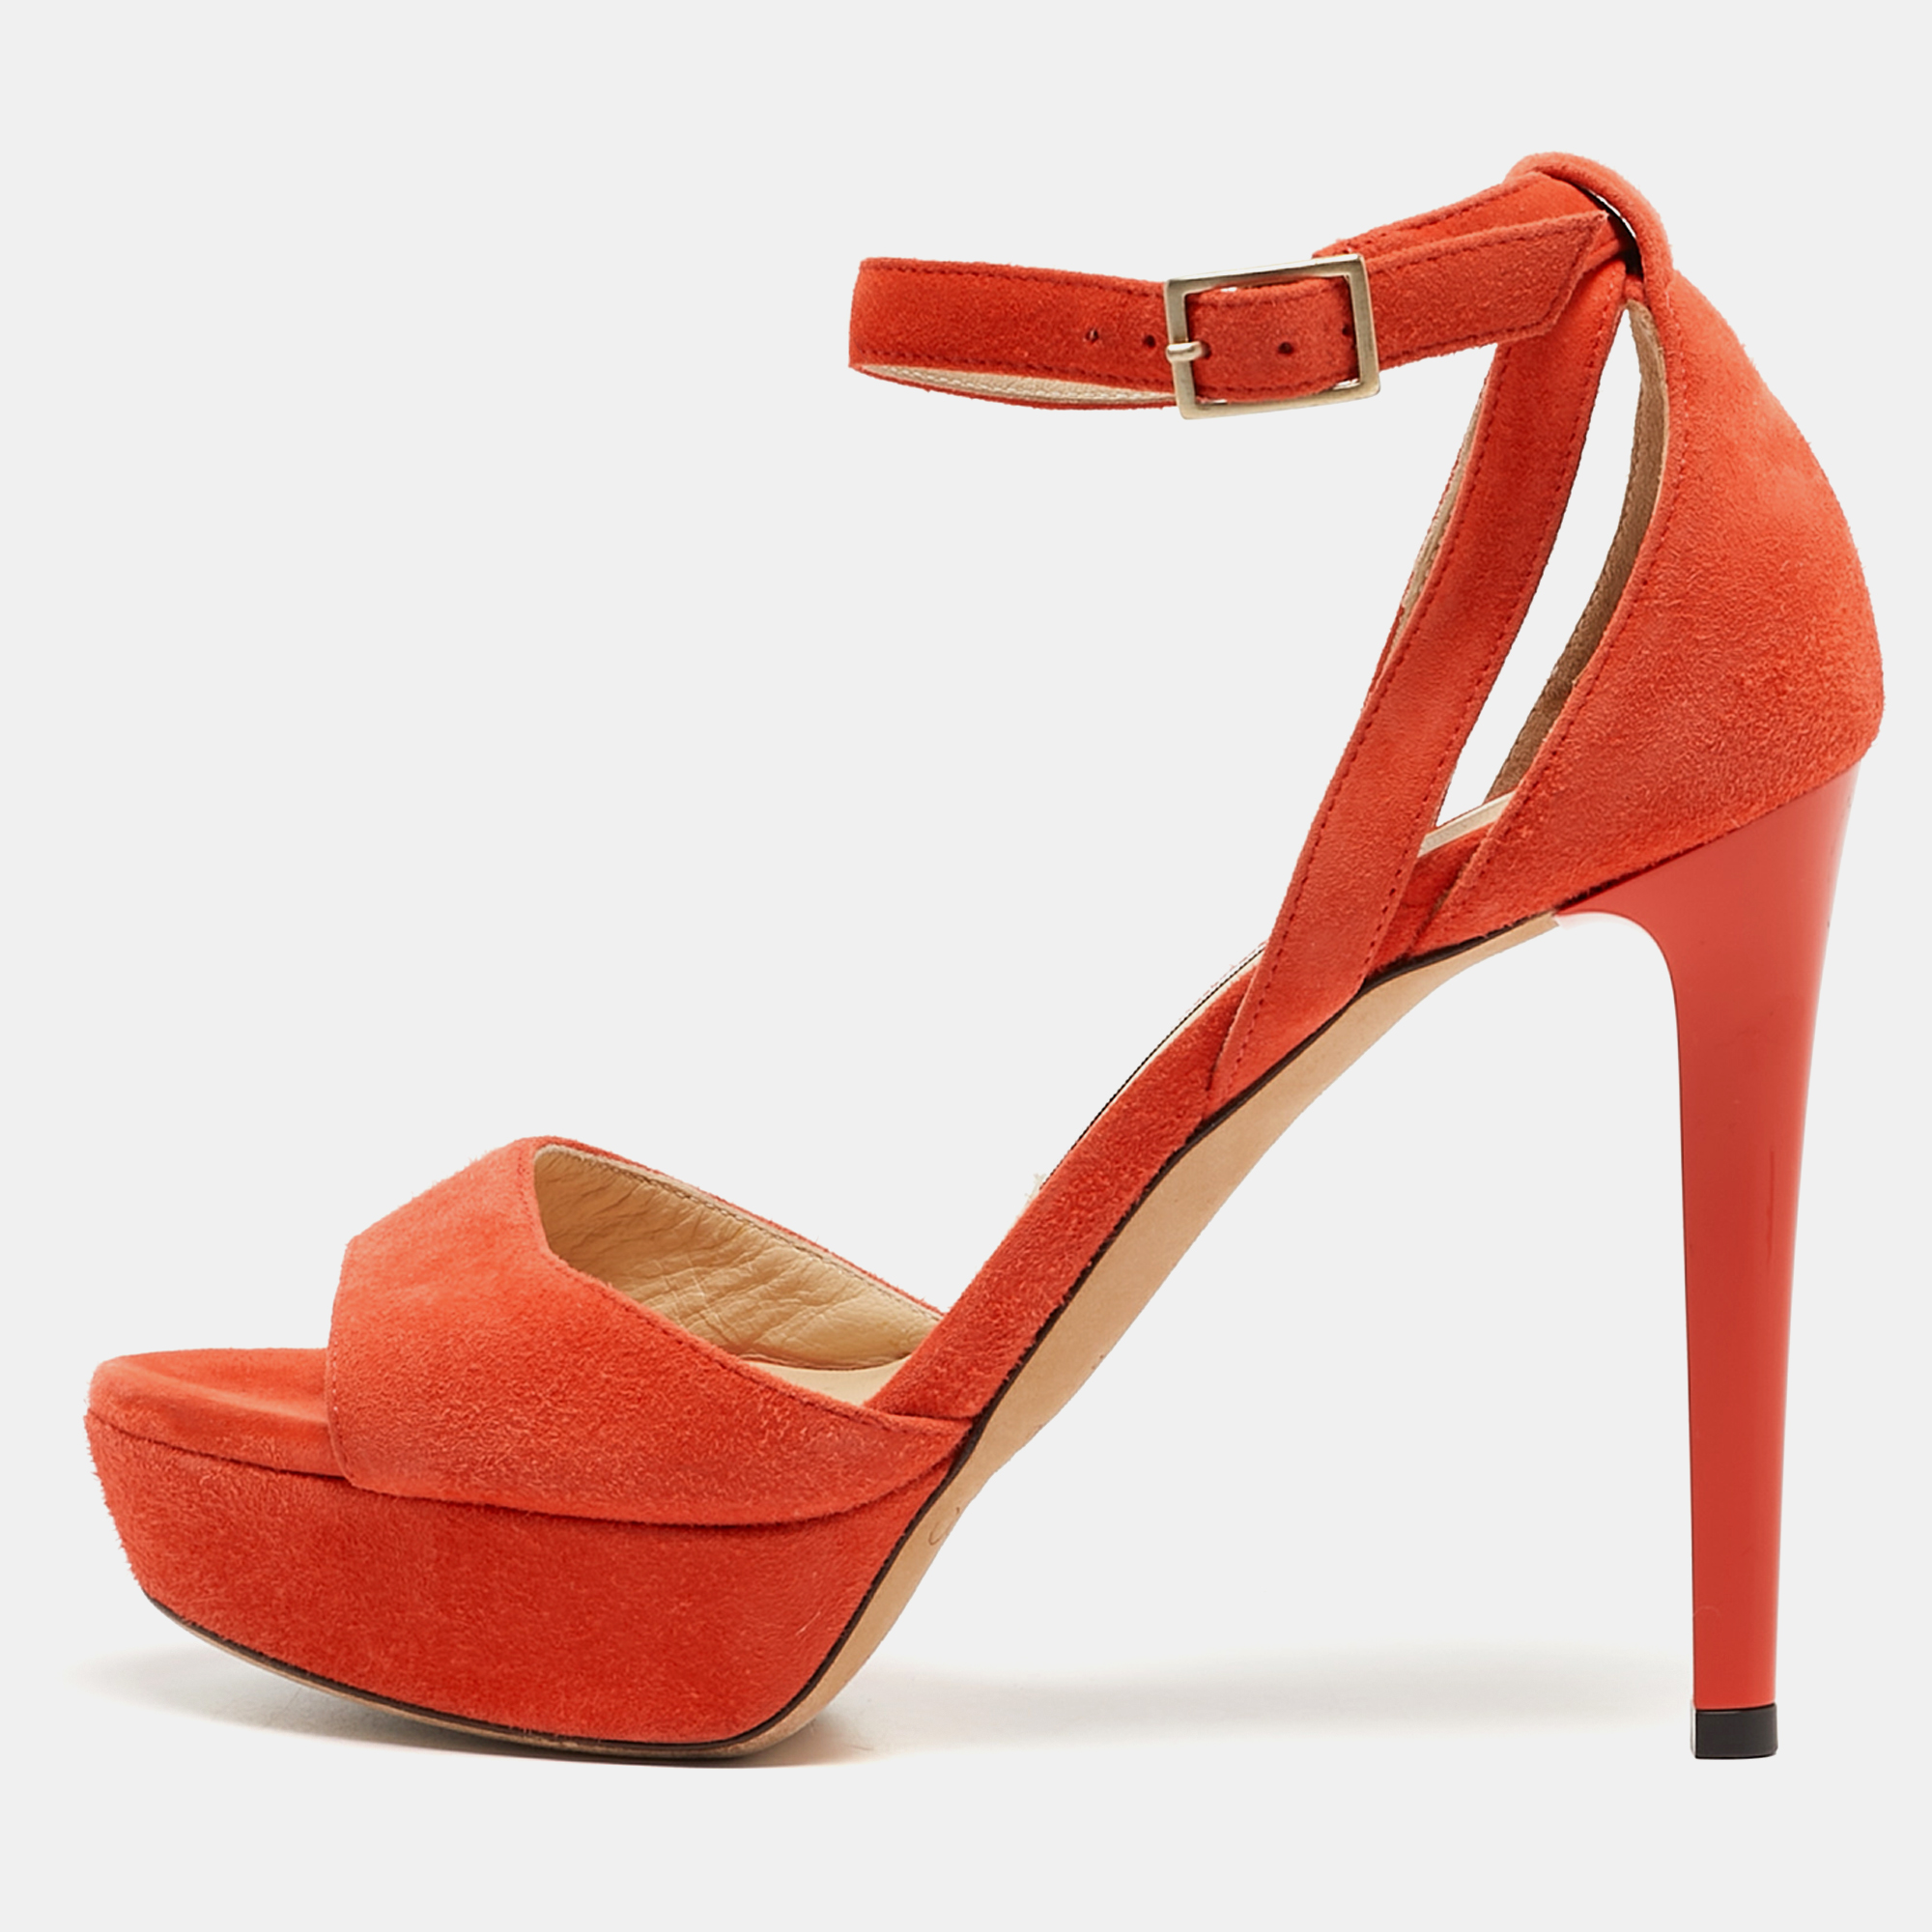 Pre-owned Jimmy Choo Orange Suede Ankle Strap Sandals Size 35.5